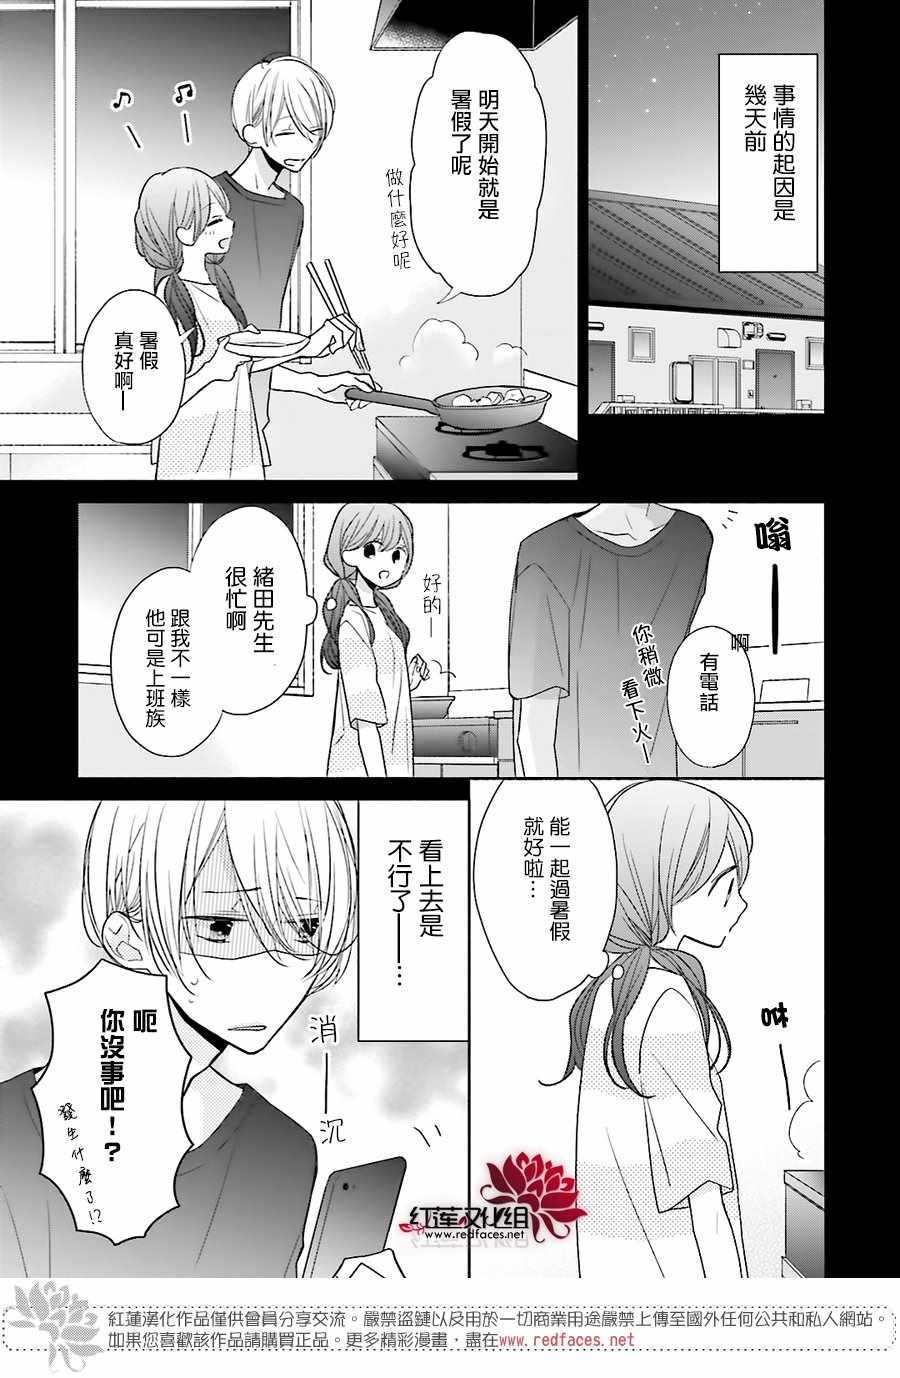 If given a second chance - 11話 - 6